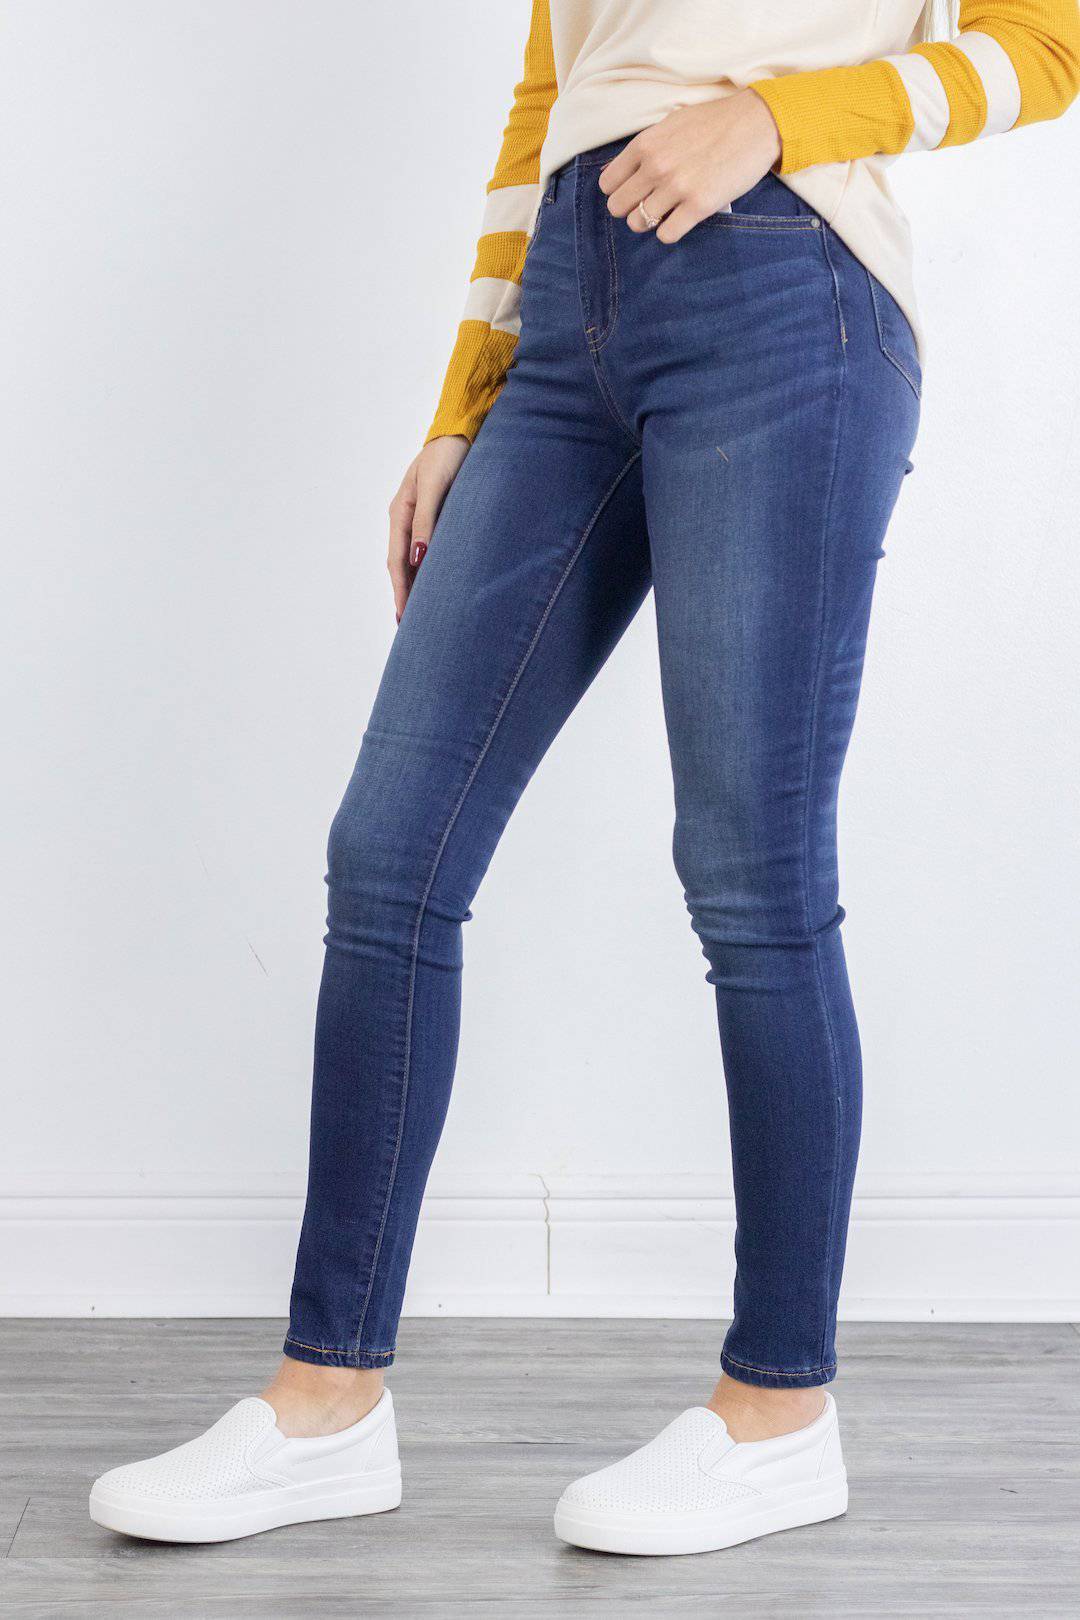 High Waisted Dark Wash Skinny - Select Trends Boutique